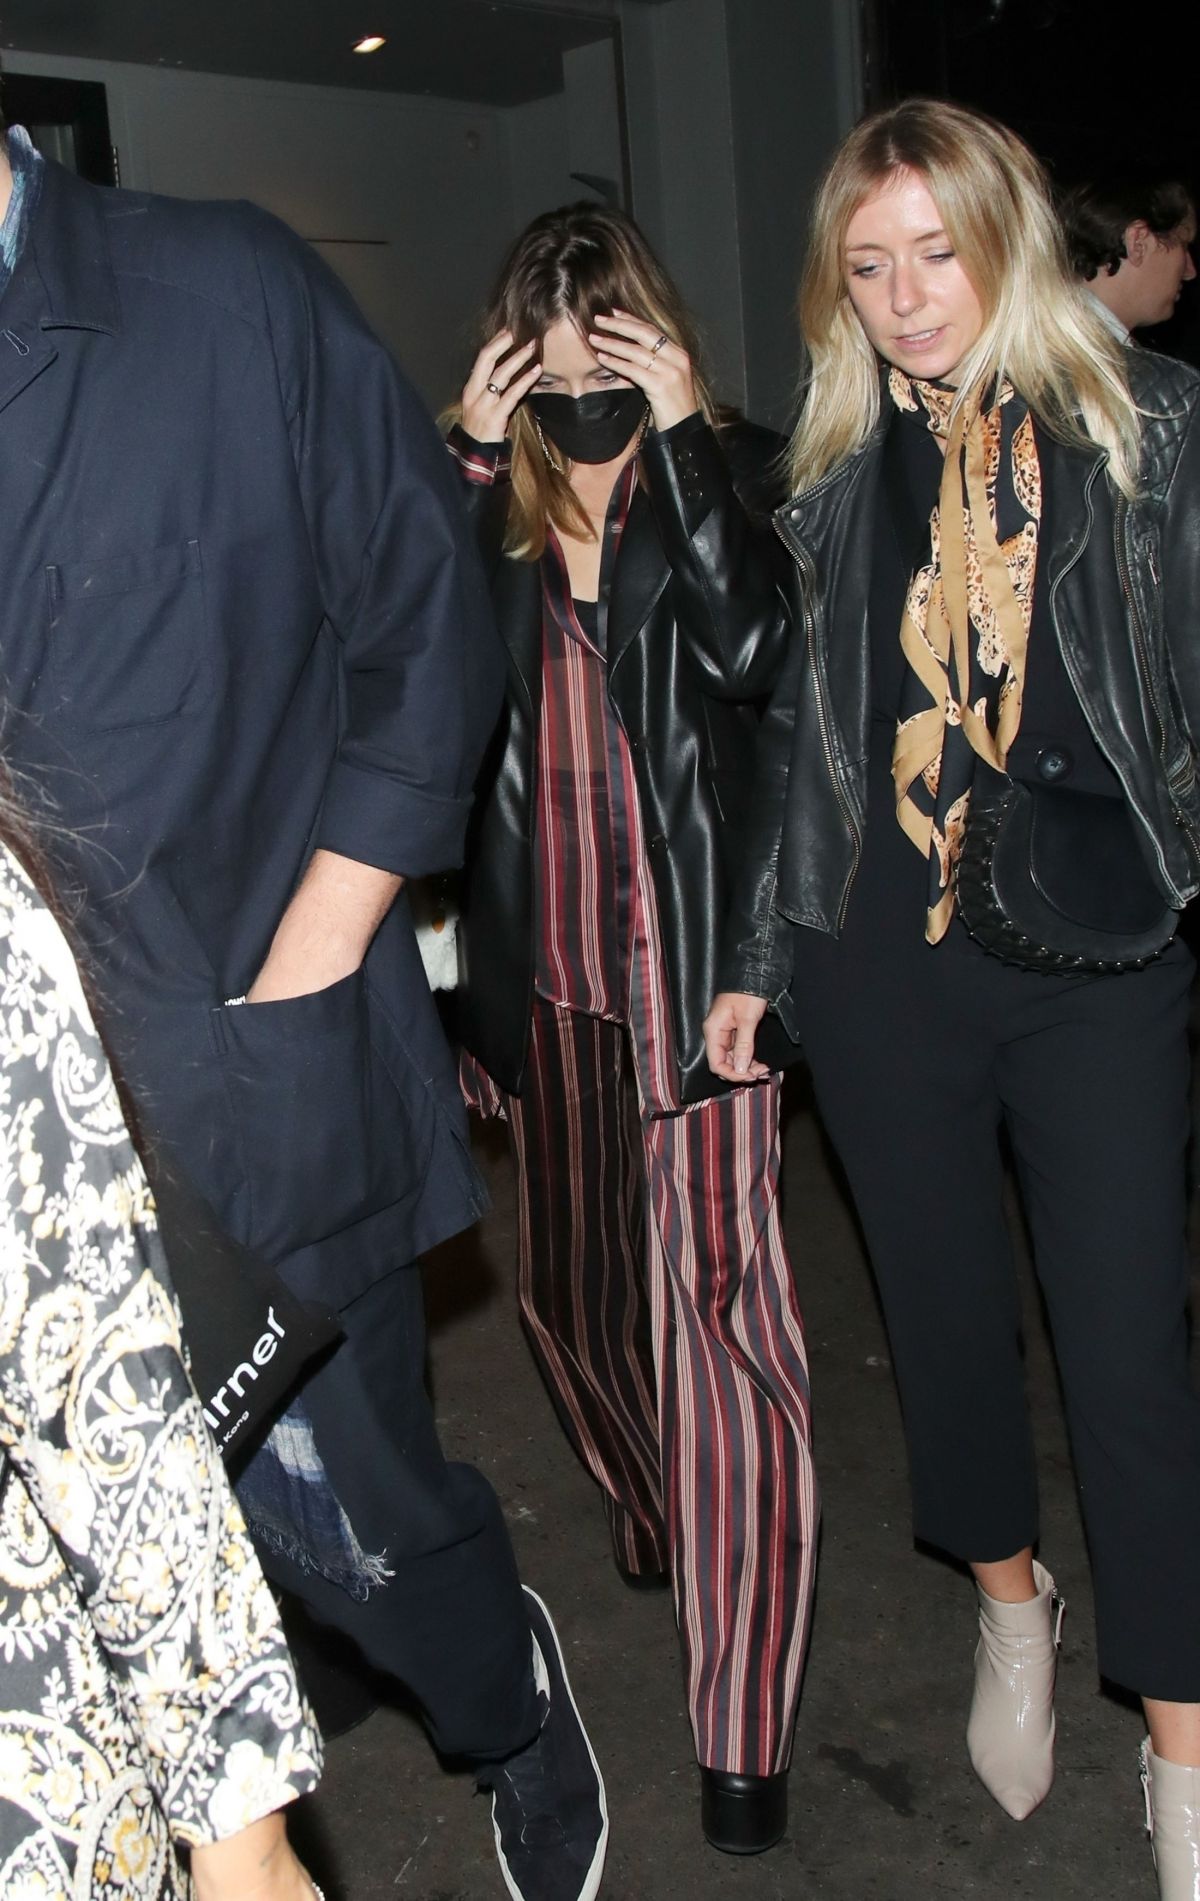 MARGOT ROBBIE and SOFIA BOUTELLA at Windmill in London 10/28/2021 ...